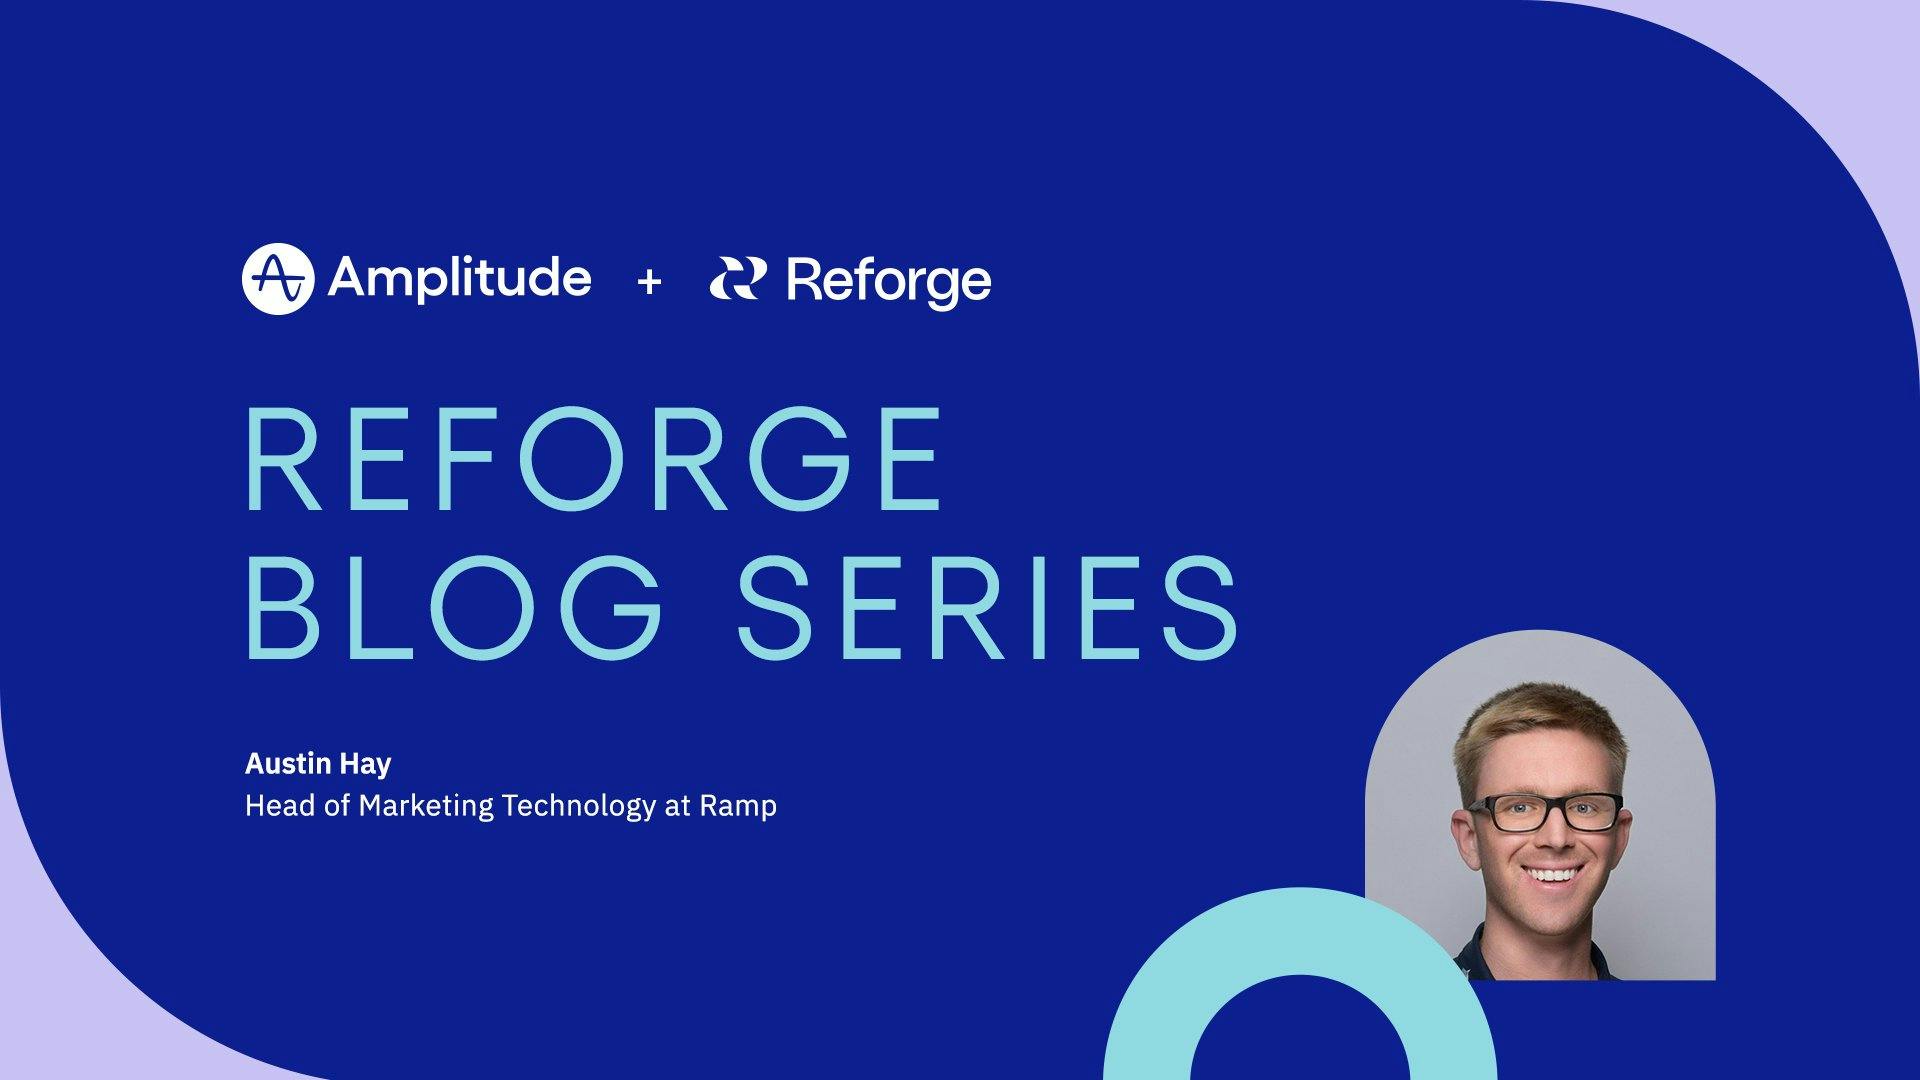 Reforge Blog Series blue, purple and teal header image in Amplitude branding with headshot featuring Austin Hay